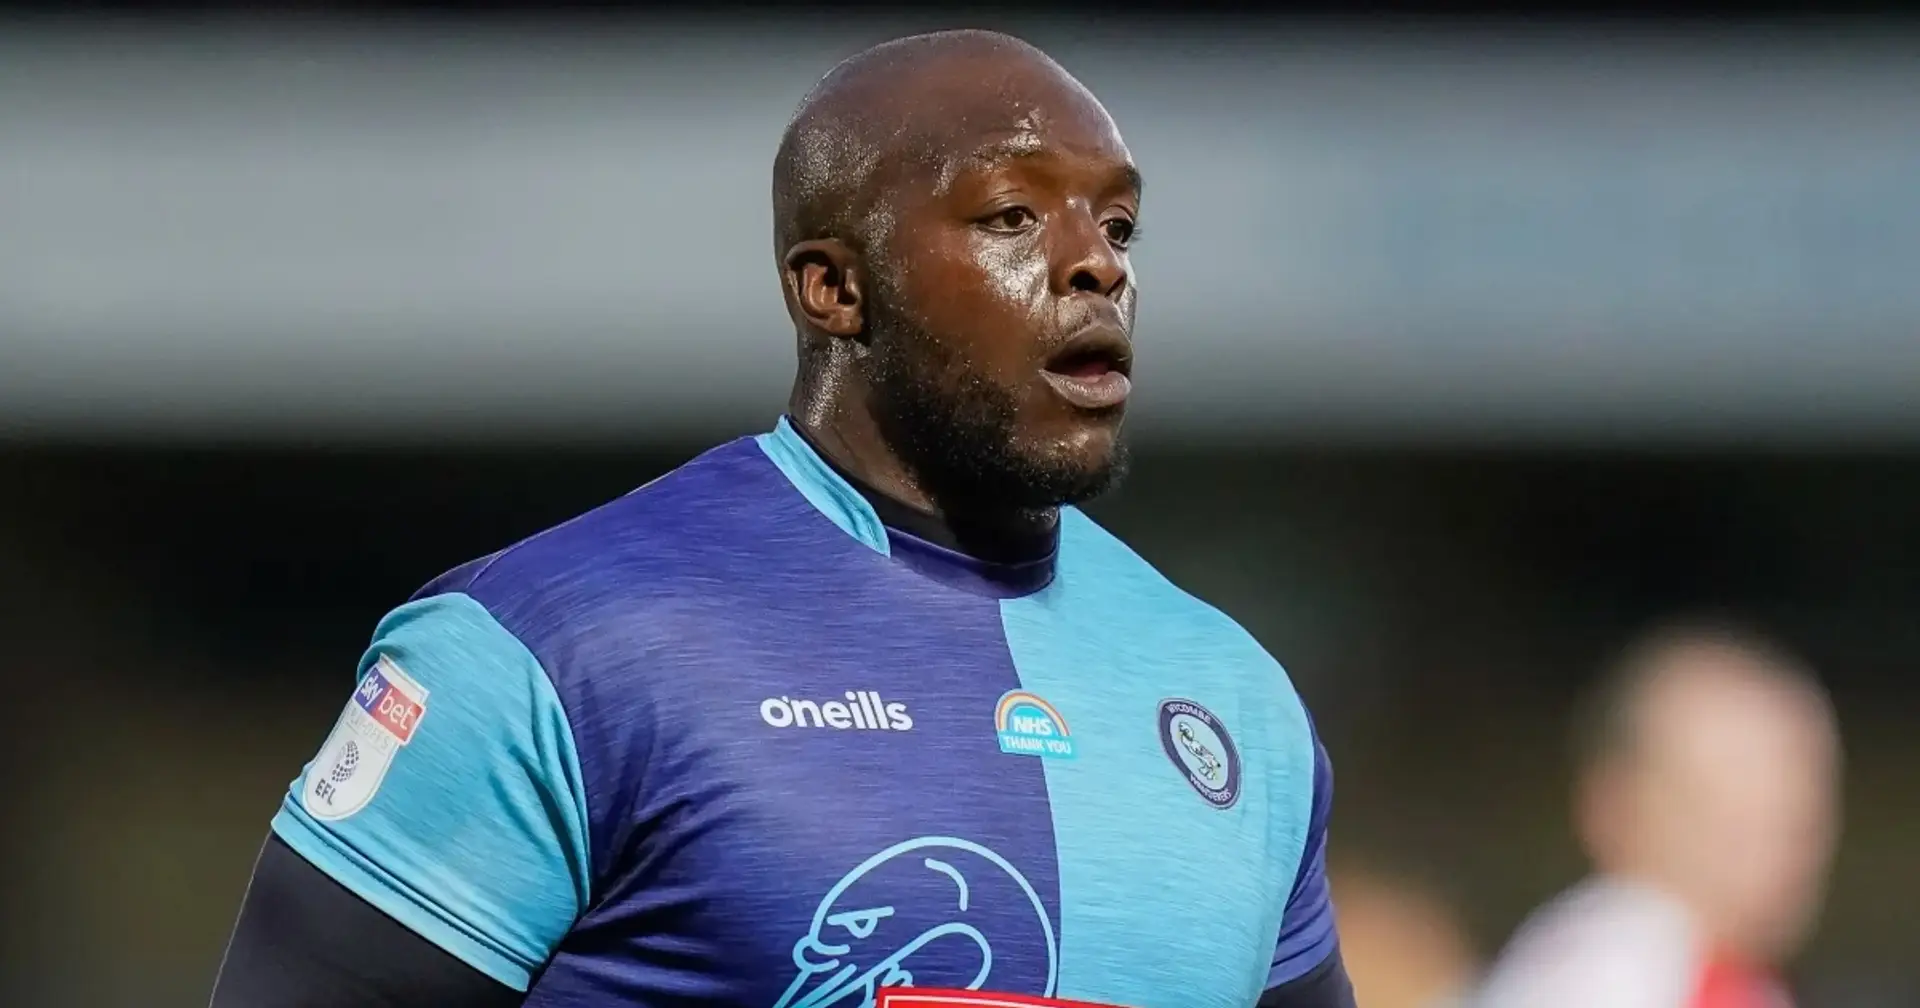 Cult hero Adebayo Akinfenwa set for Championship debut after signing new contract with Wycombe Wanderers